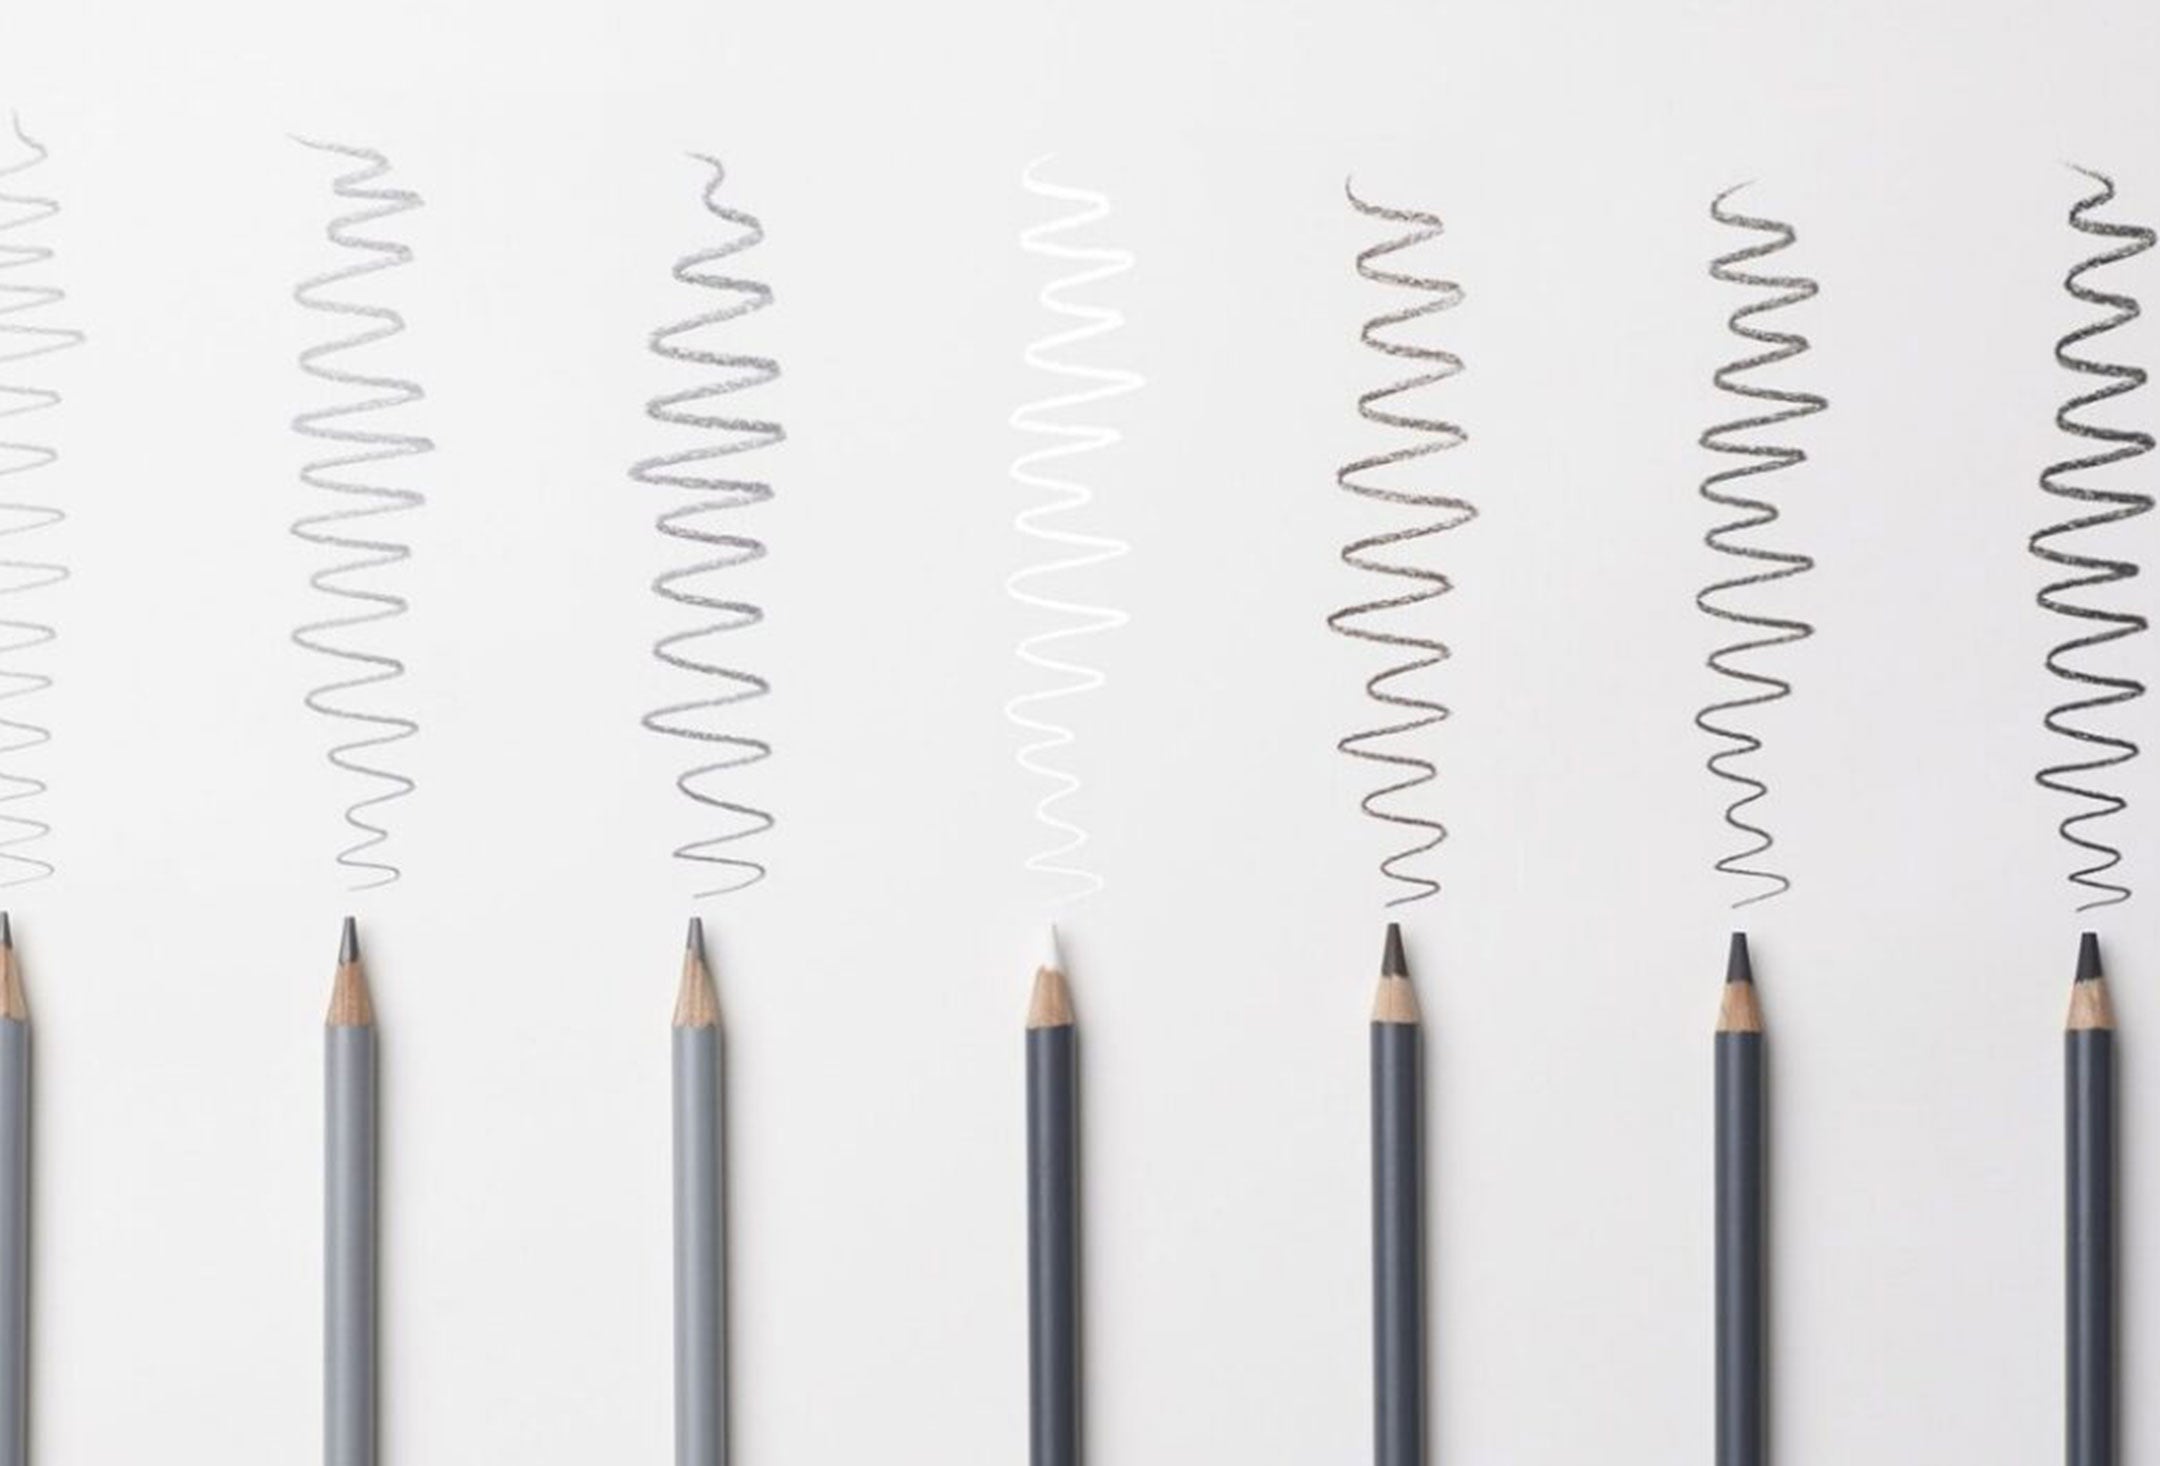 How to use graphite pencils